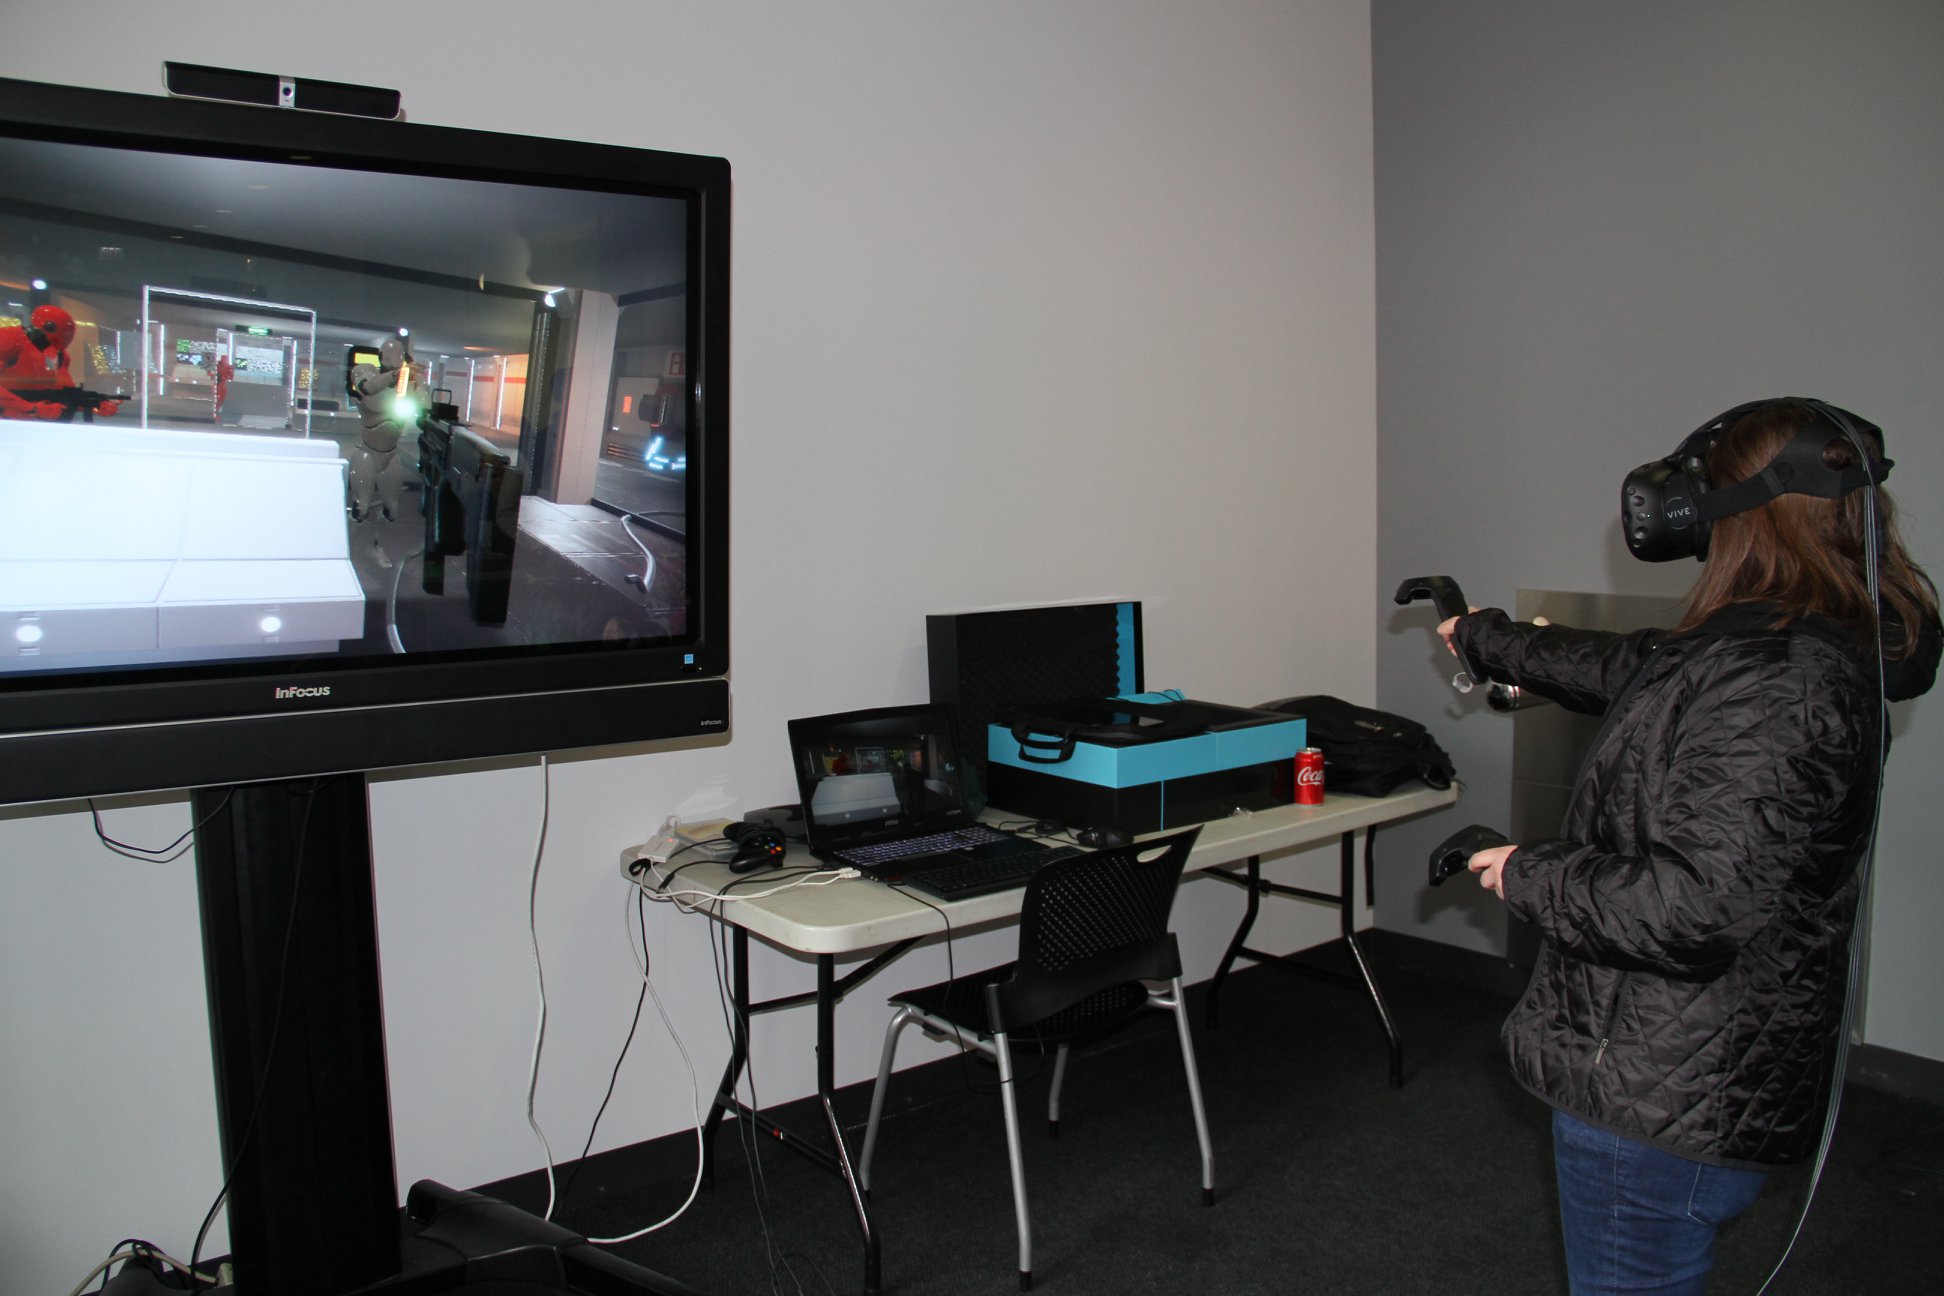 Photograph of a guest playing a VR game built by students (at Manifest).